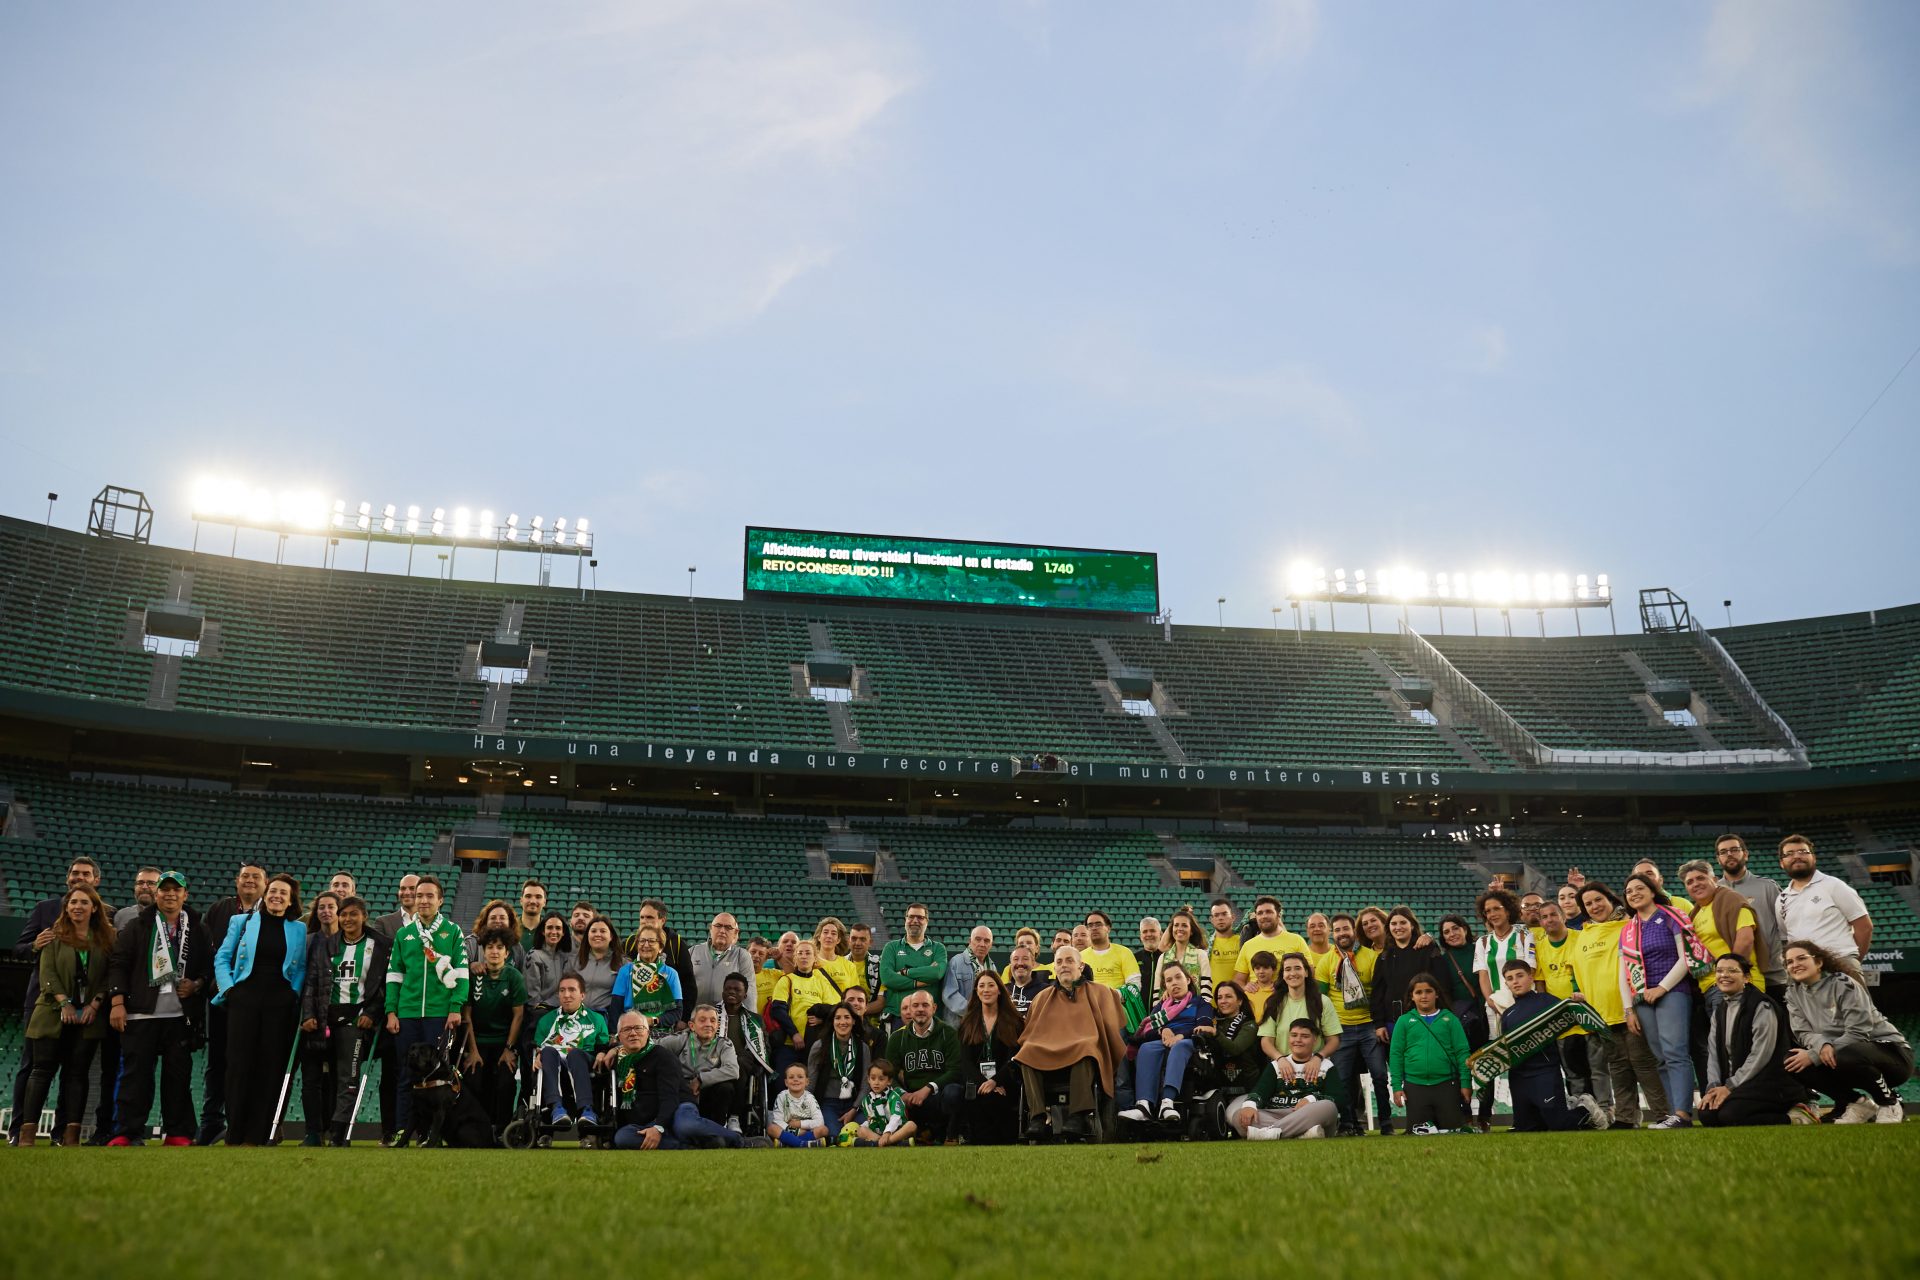 Group of disabled fans and organisers stands on the Real Betis Balompié pitch in the Benito Vilamarin Stadium after the match. In the backgroud empty stands and giant screen showing the record breaking number of disabled fans attending the match